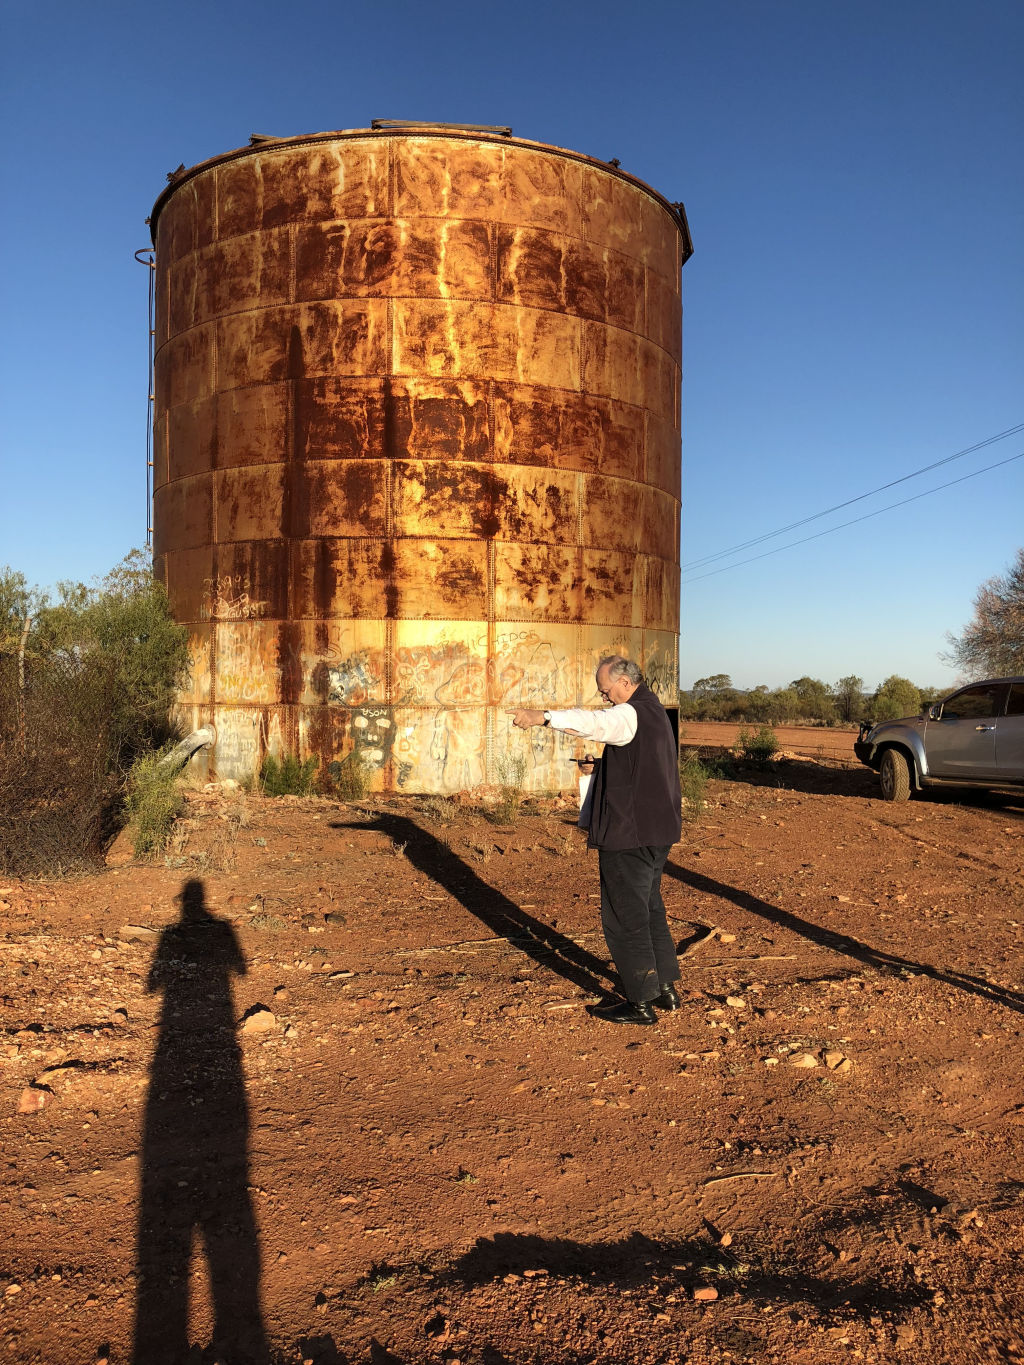 The composer, the architect and the water tank in Cobar